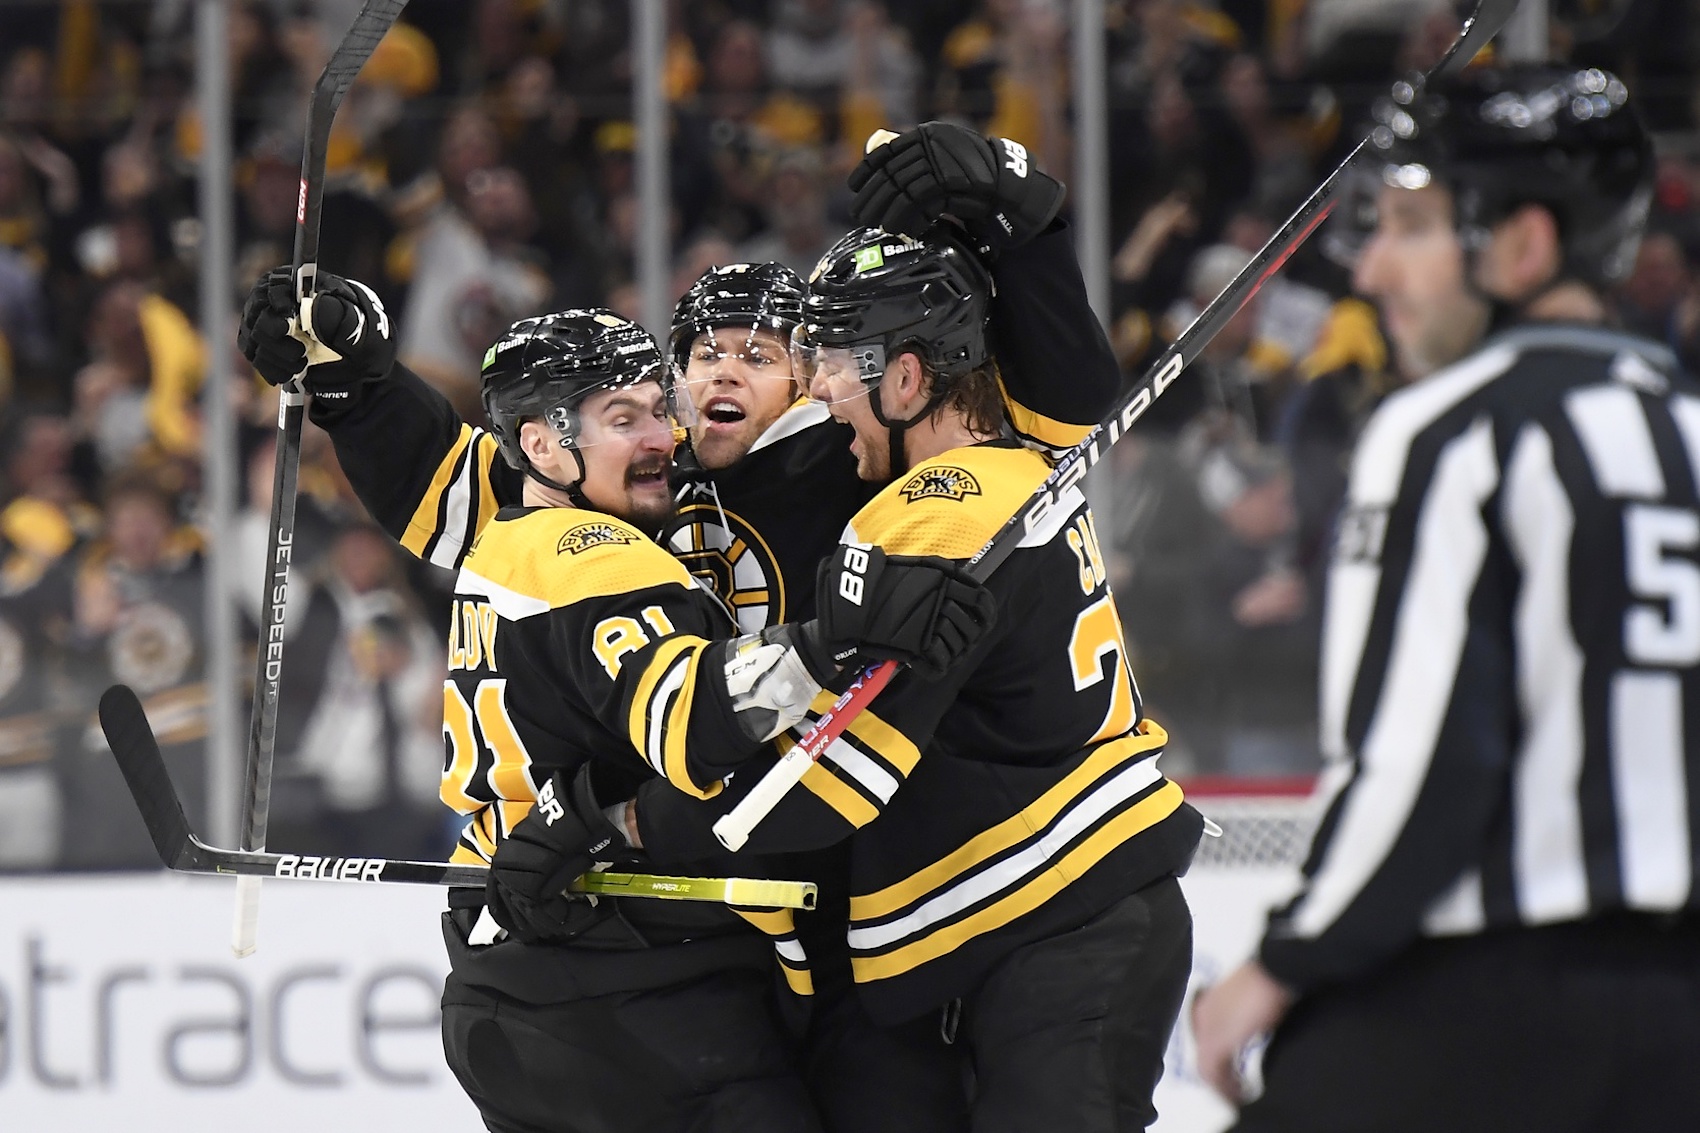 Apr 26, 2023; Boston, Massachusetts, USA; Boston Bruins left wing Taylor Hall (71) (middle) celebrates his goal with defenseman Dmitry Orlov (81) and defenseman Brandon Carlo (25) during the third period in game five of the first round of the 2023 Stanley Cup Playoffs against the Florida Panthers at TD Garden. Mandatory Credit: Bob DeChiara-USA TODAY Sports